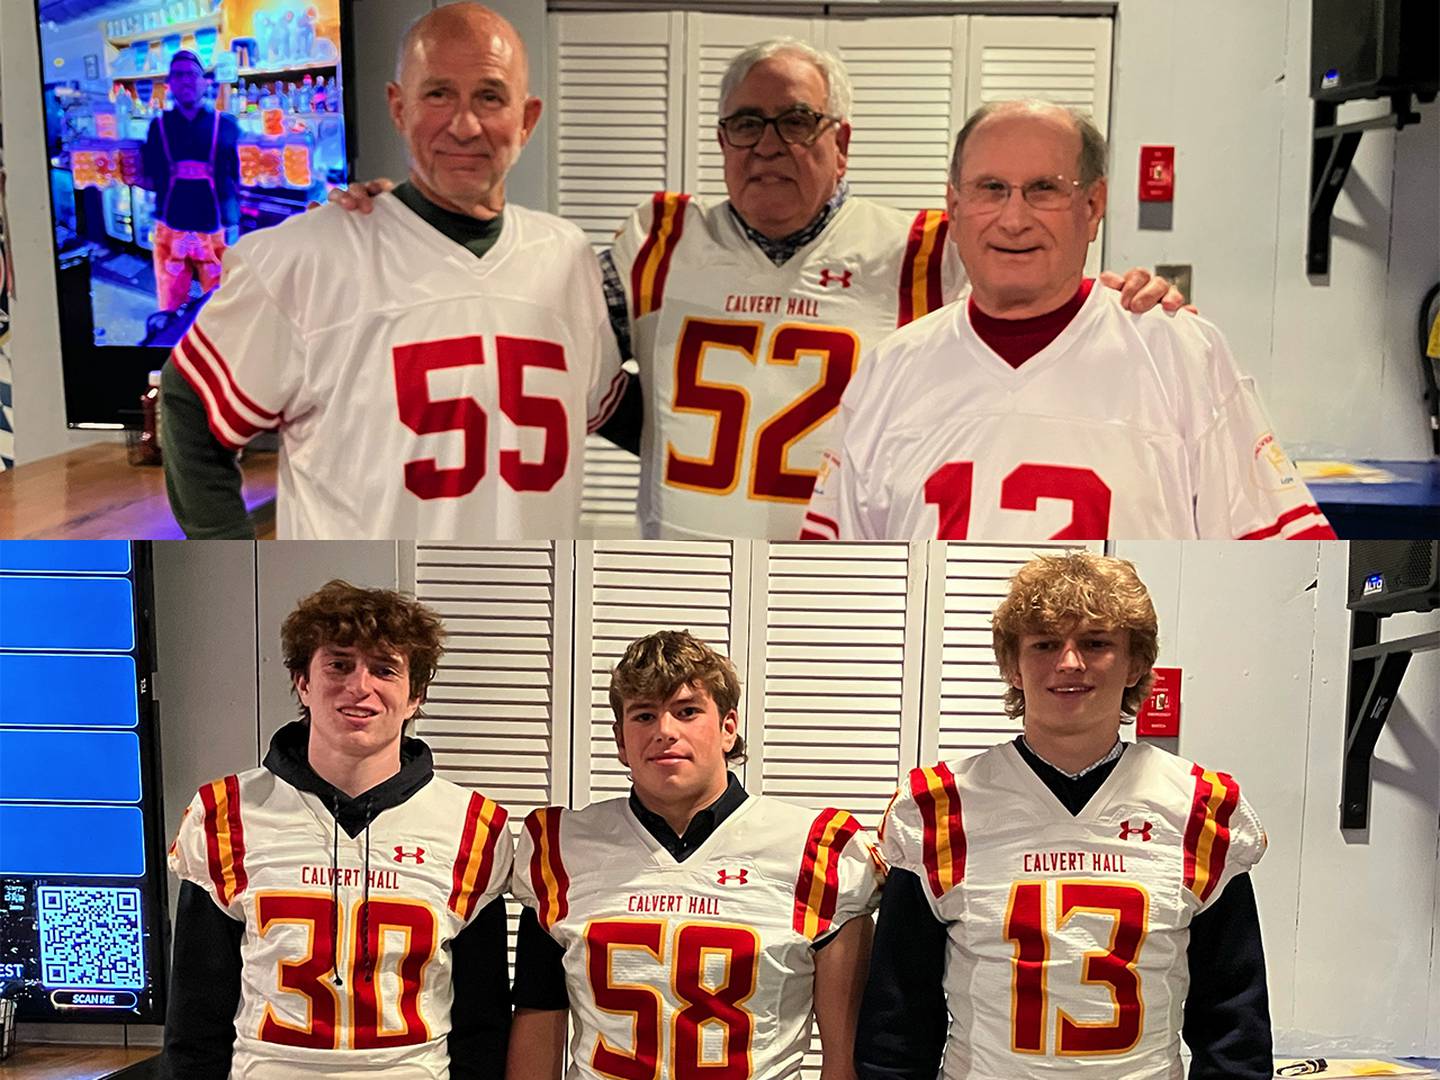 Two different generations of Calvert Hall place-kicking units brought Turkey Bowl glory to their school by producing game-winning field goals on Thanksgiving morning, 55 years apart. The 1969 unit included (top row from left) snapper Bruce Willis, kicker Phil Marsiglia and holder Phil Popovec. The 2022 kicking unit (bottom row, from left) included senior kicker Dylan Manna, long snapper Mason Notaro, junior holder Dane Grunder.